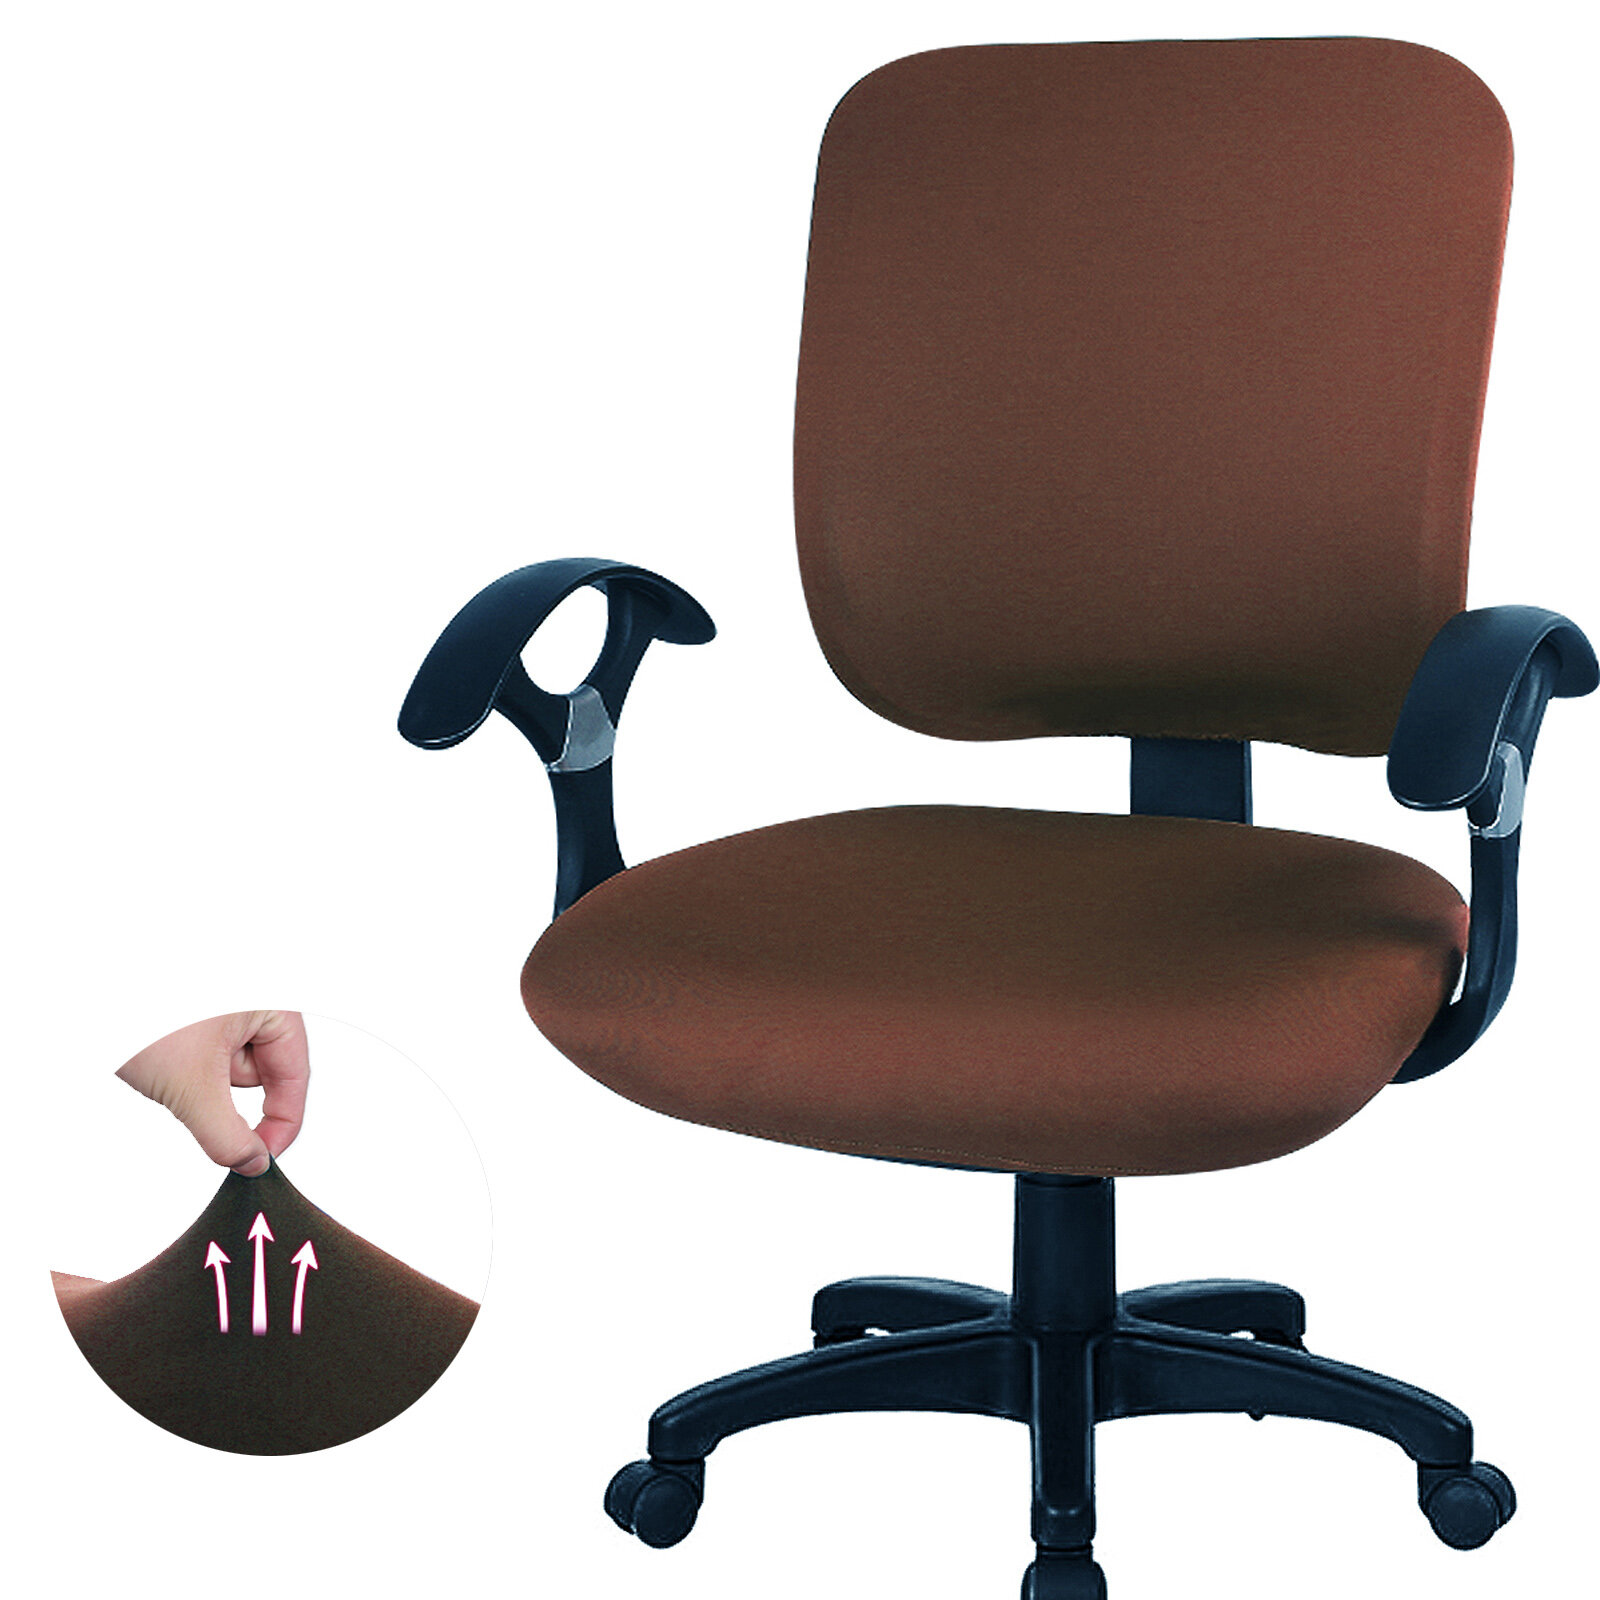 CAVEEN Office Chair Covers 2piece Stretchable Computer Office Chair Cover Universal Chair Seat Cover